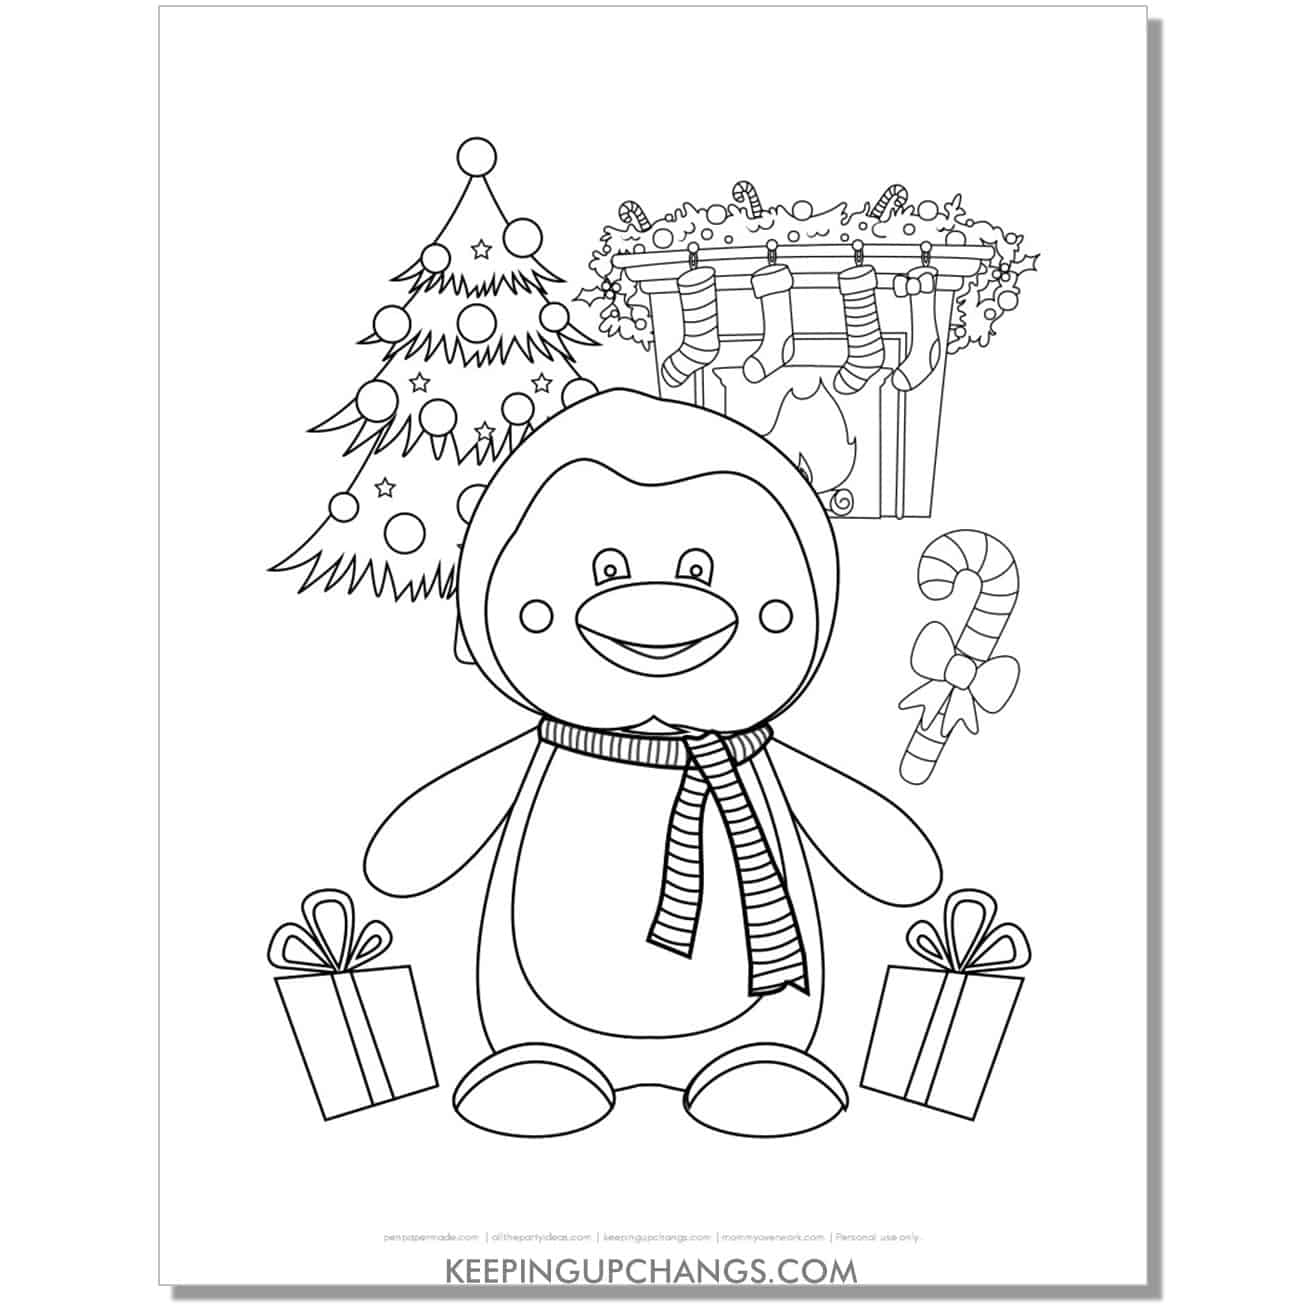 free christmas penguin with tree, stockings, presents, candy cane coloring page.